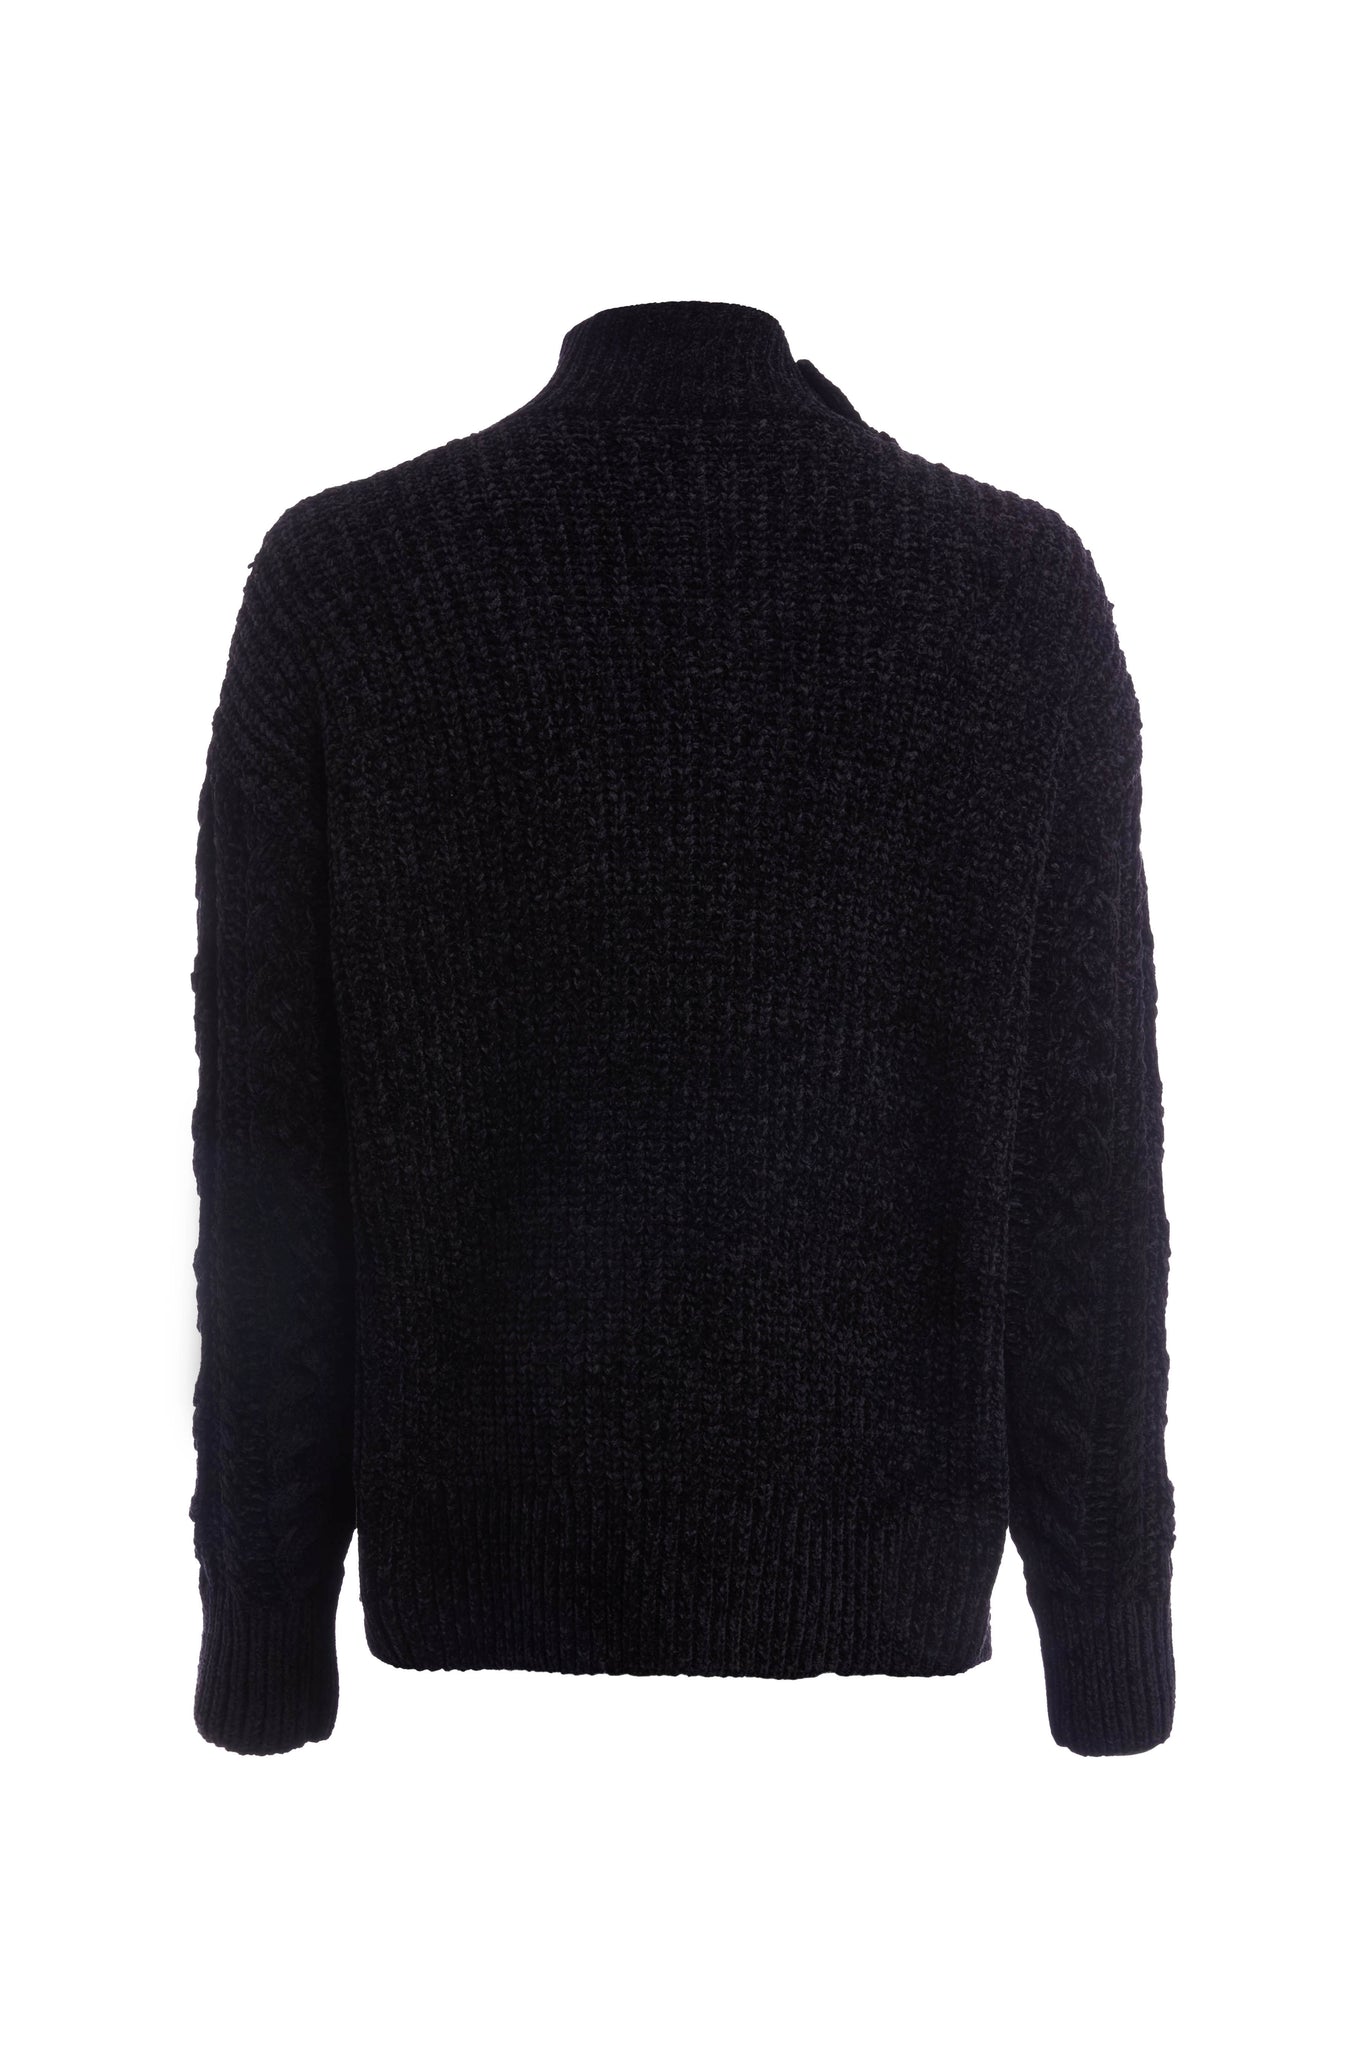 Brompton Cable Knit (Black)